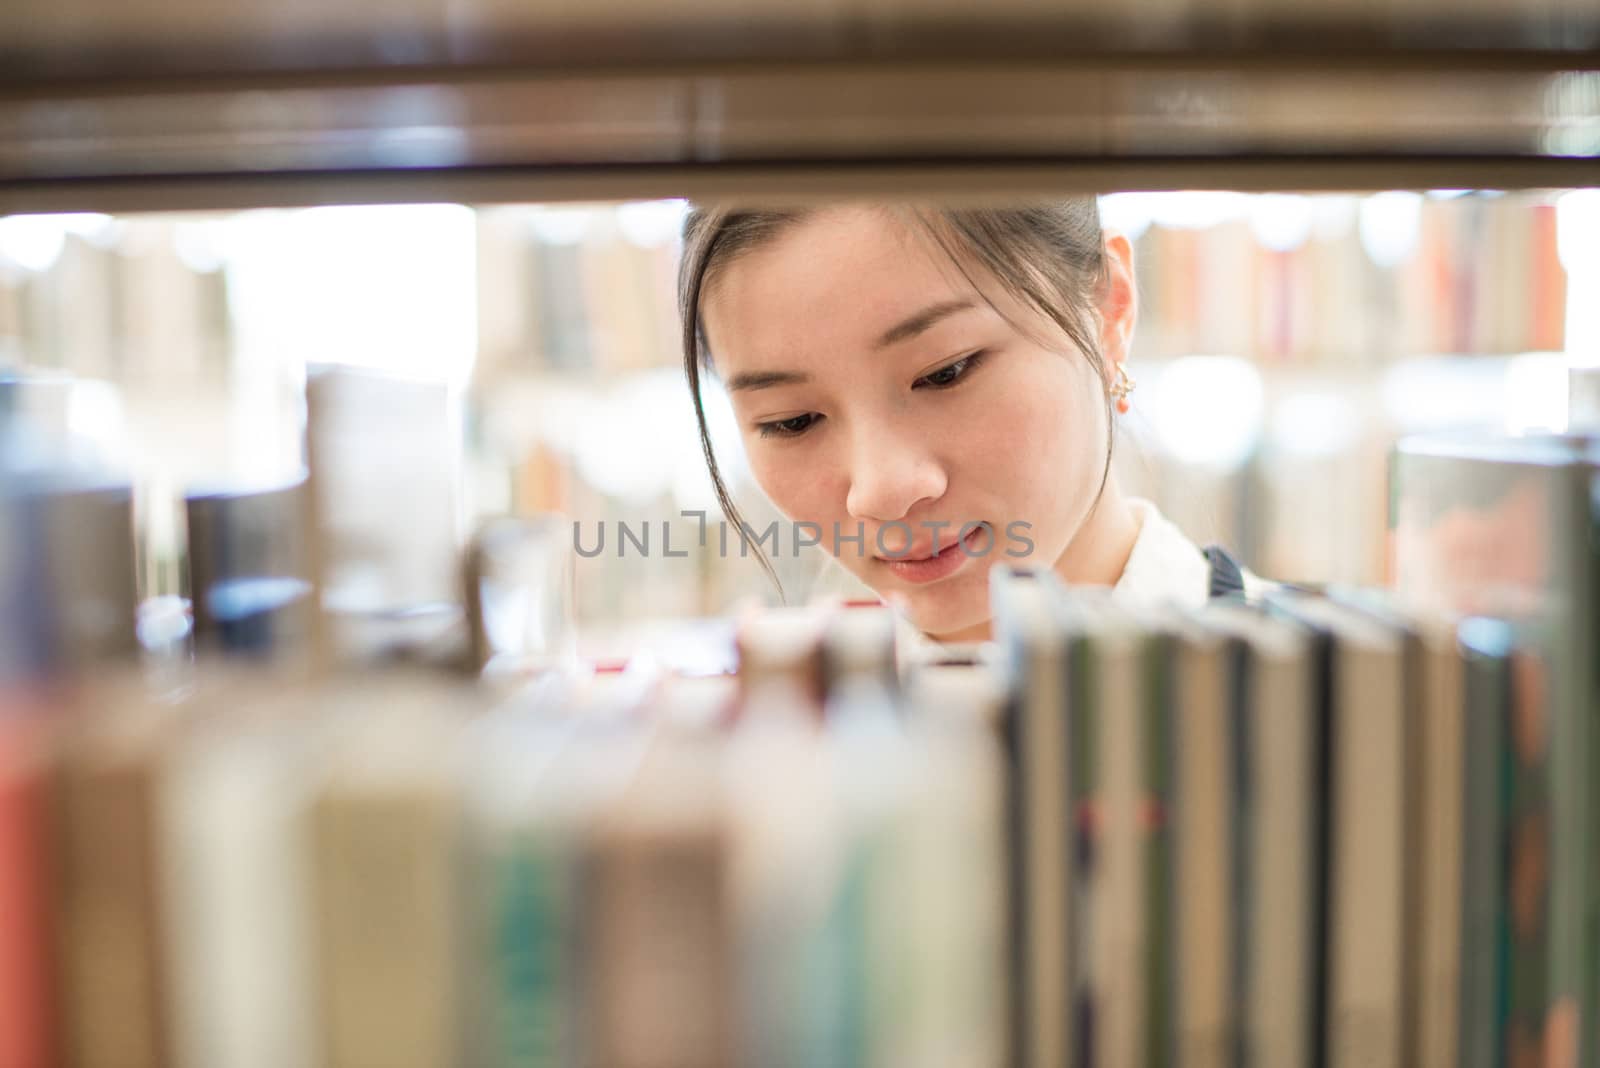 Attractive young woman looking for a book from a bookshelf in library